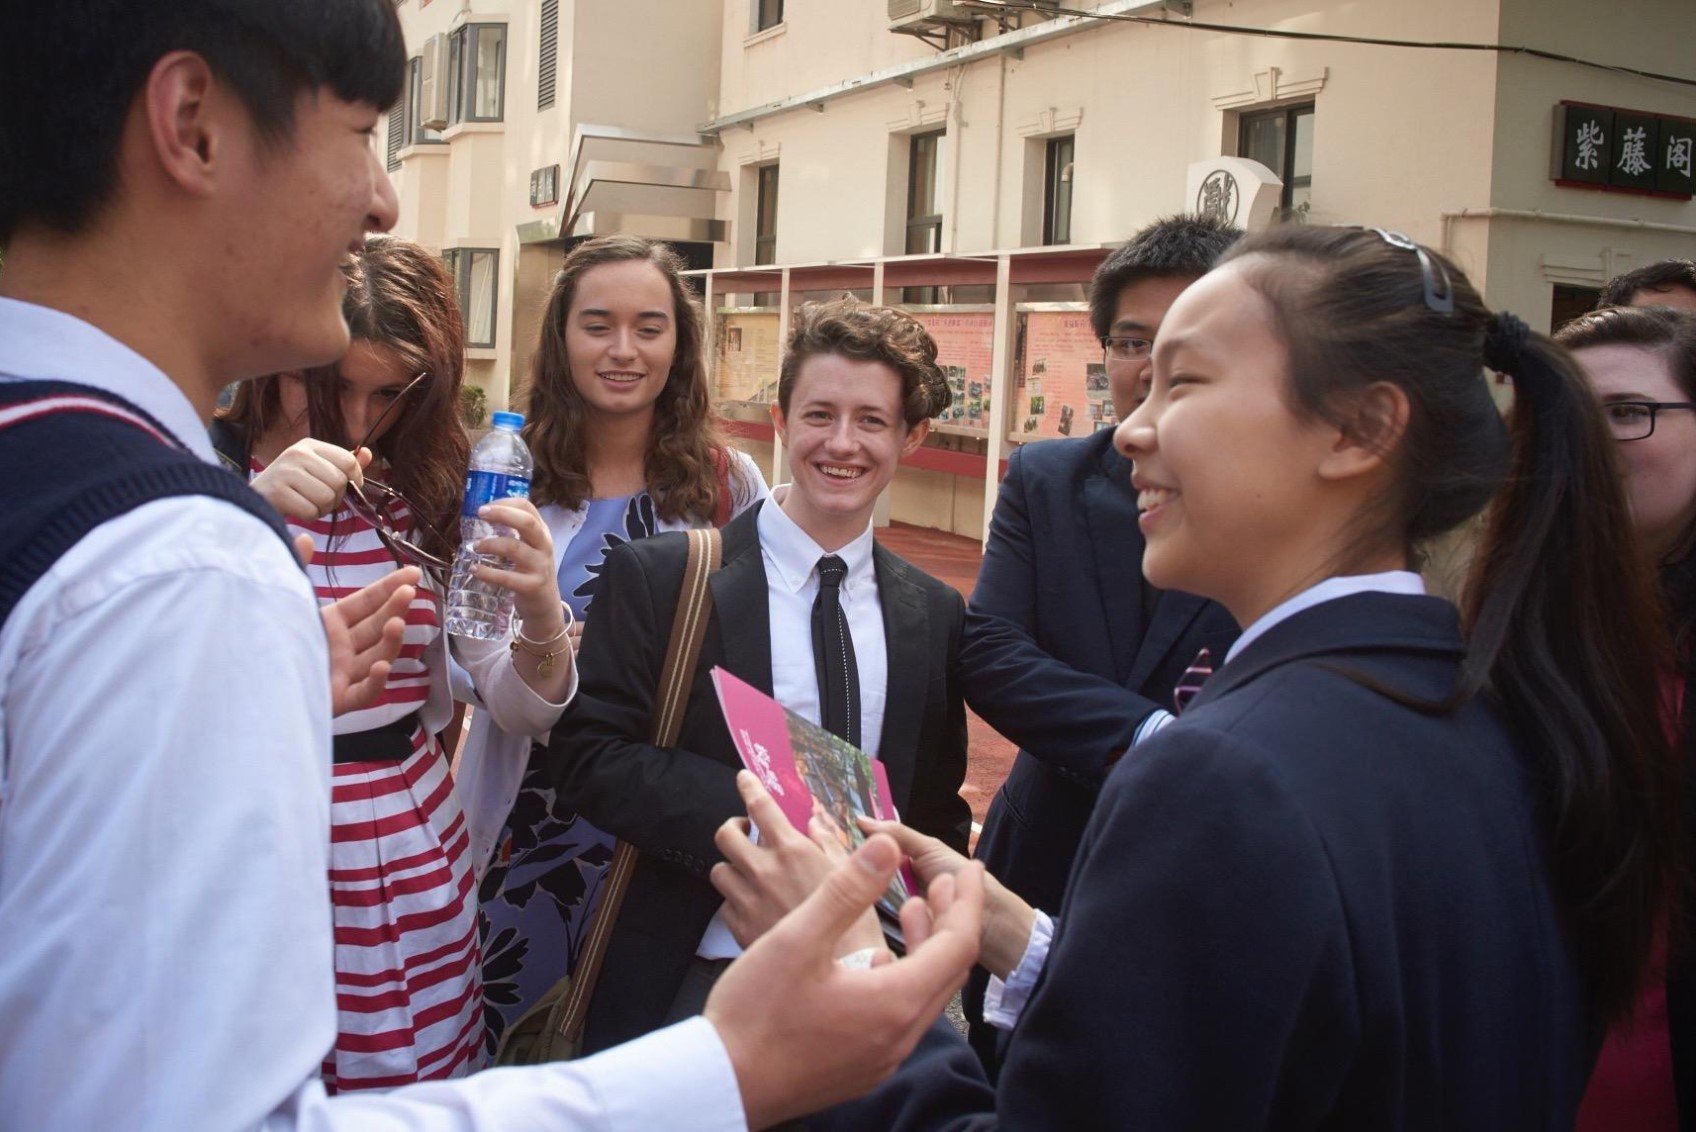 Student Study Tour group members interact with students from China.